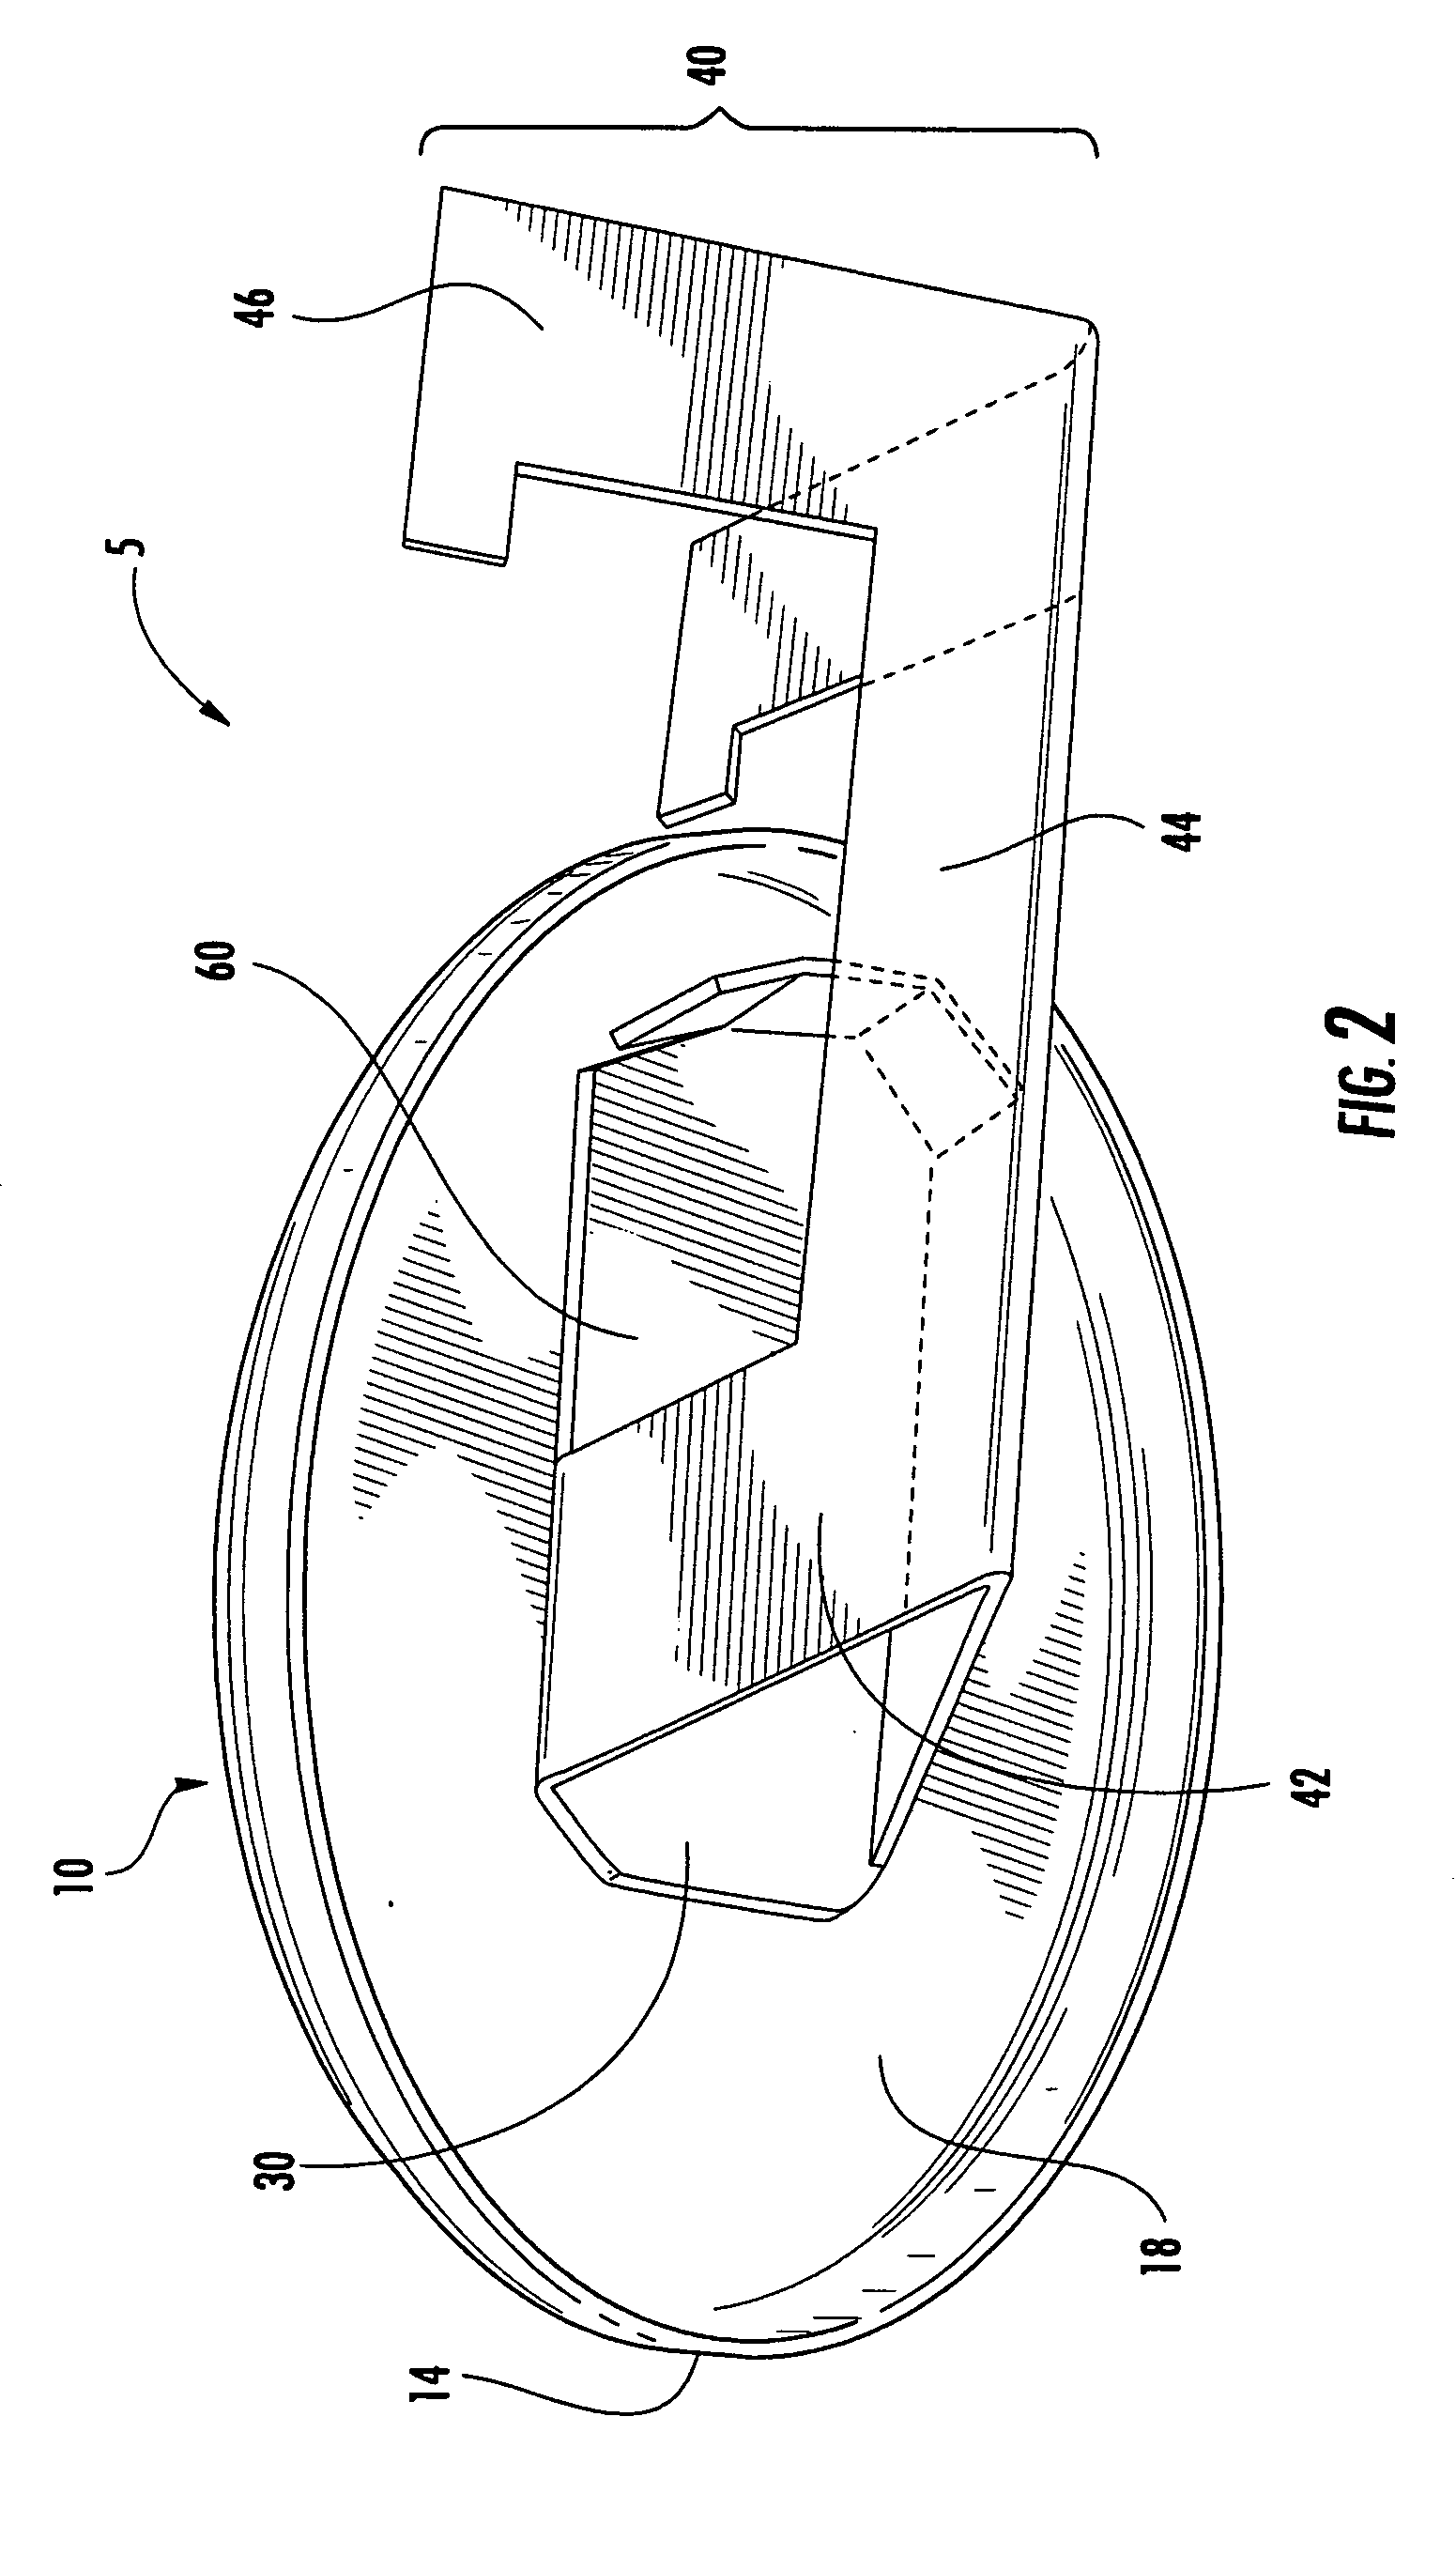 Flying toy having gyroscopic and gliding components